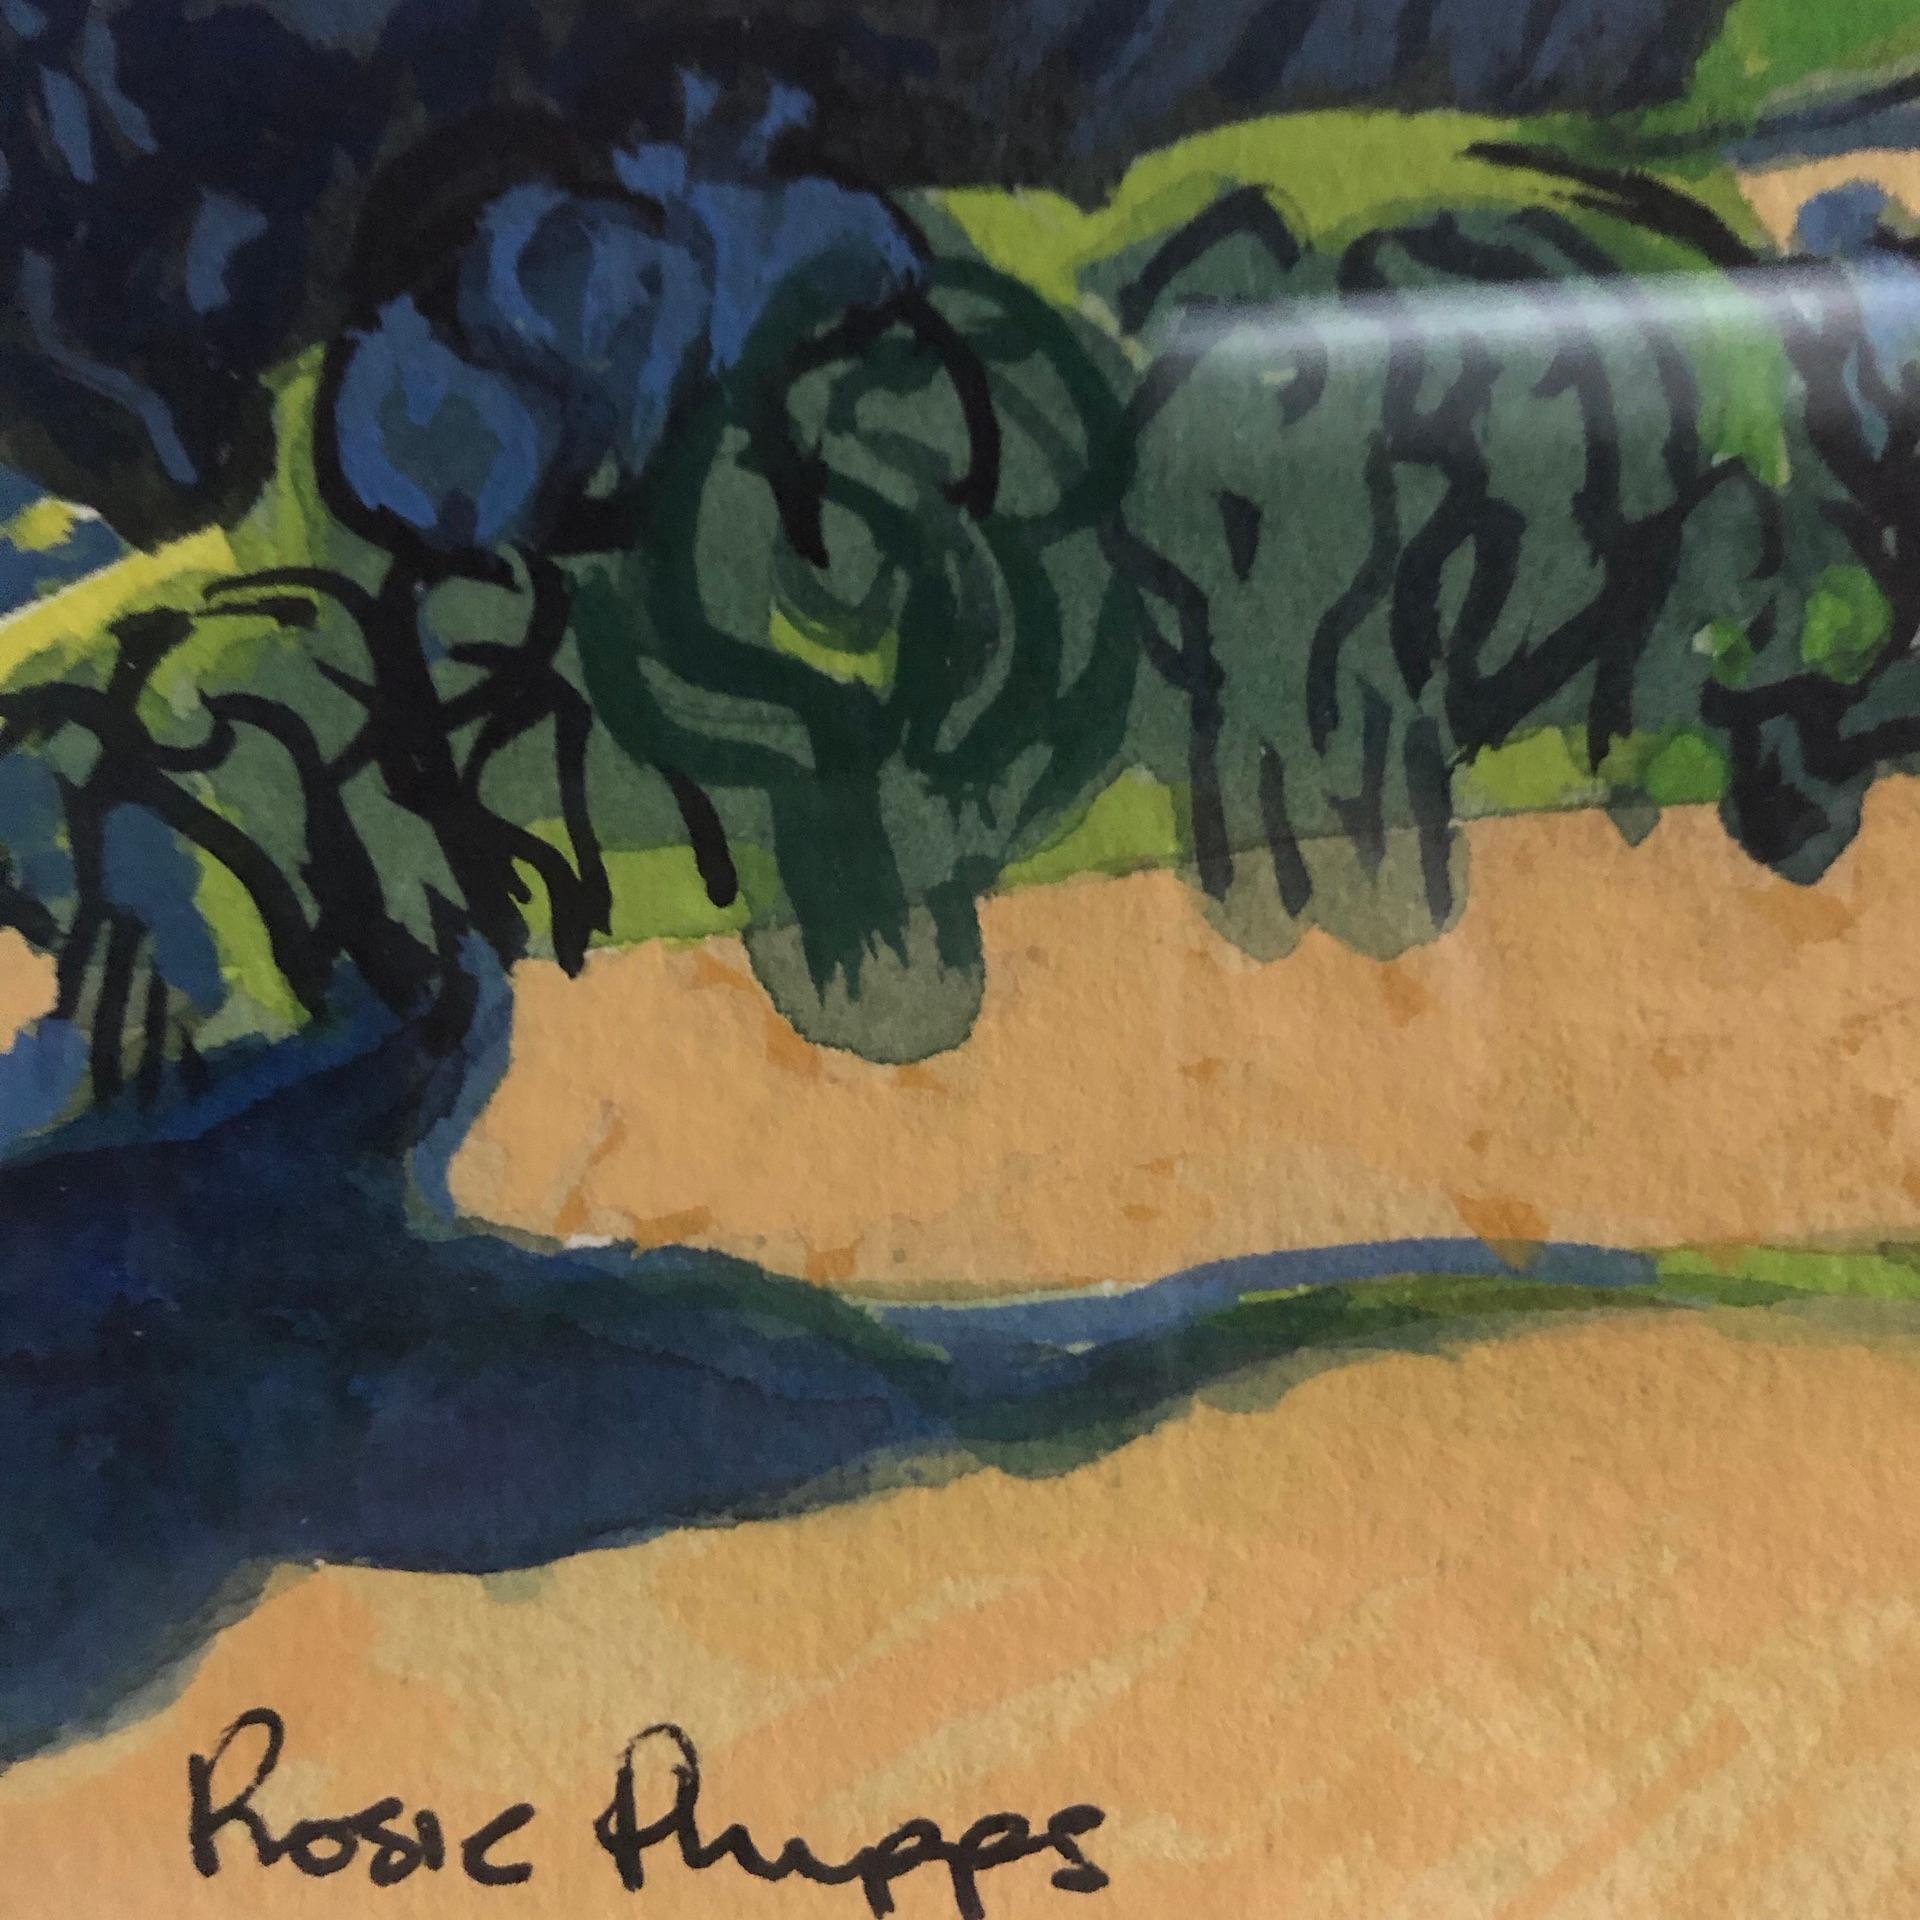 Rosie Phipps
Cotswold Light
Original Landscape Painting
Water Colour Paint, Gouache and Pastel on Paper
Image Size: H 10cm x W 25cm
Mounted Size: H 18.5cm x W 34.5cm
Framed Size: H 23cm x W 40cm x D 3.5cm
Sold Framed in a White Wood Grain